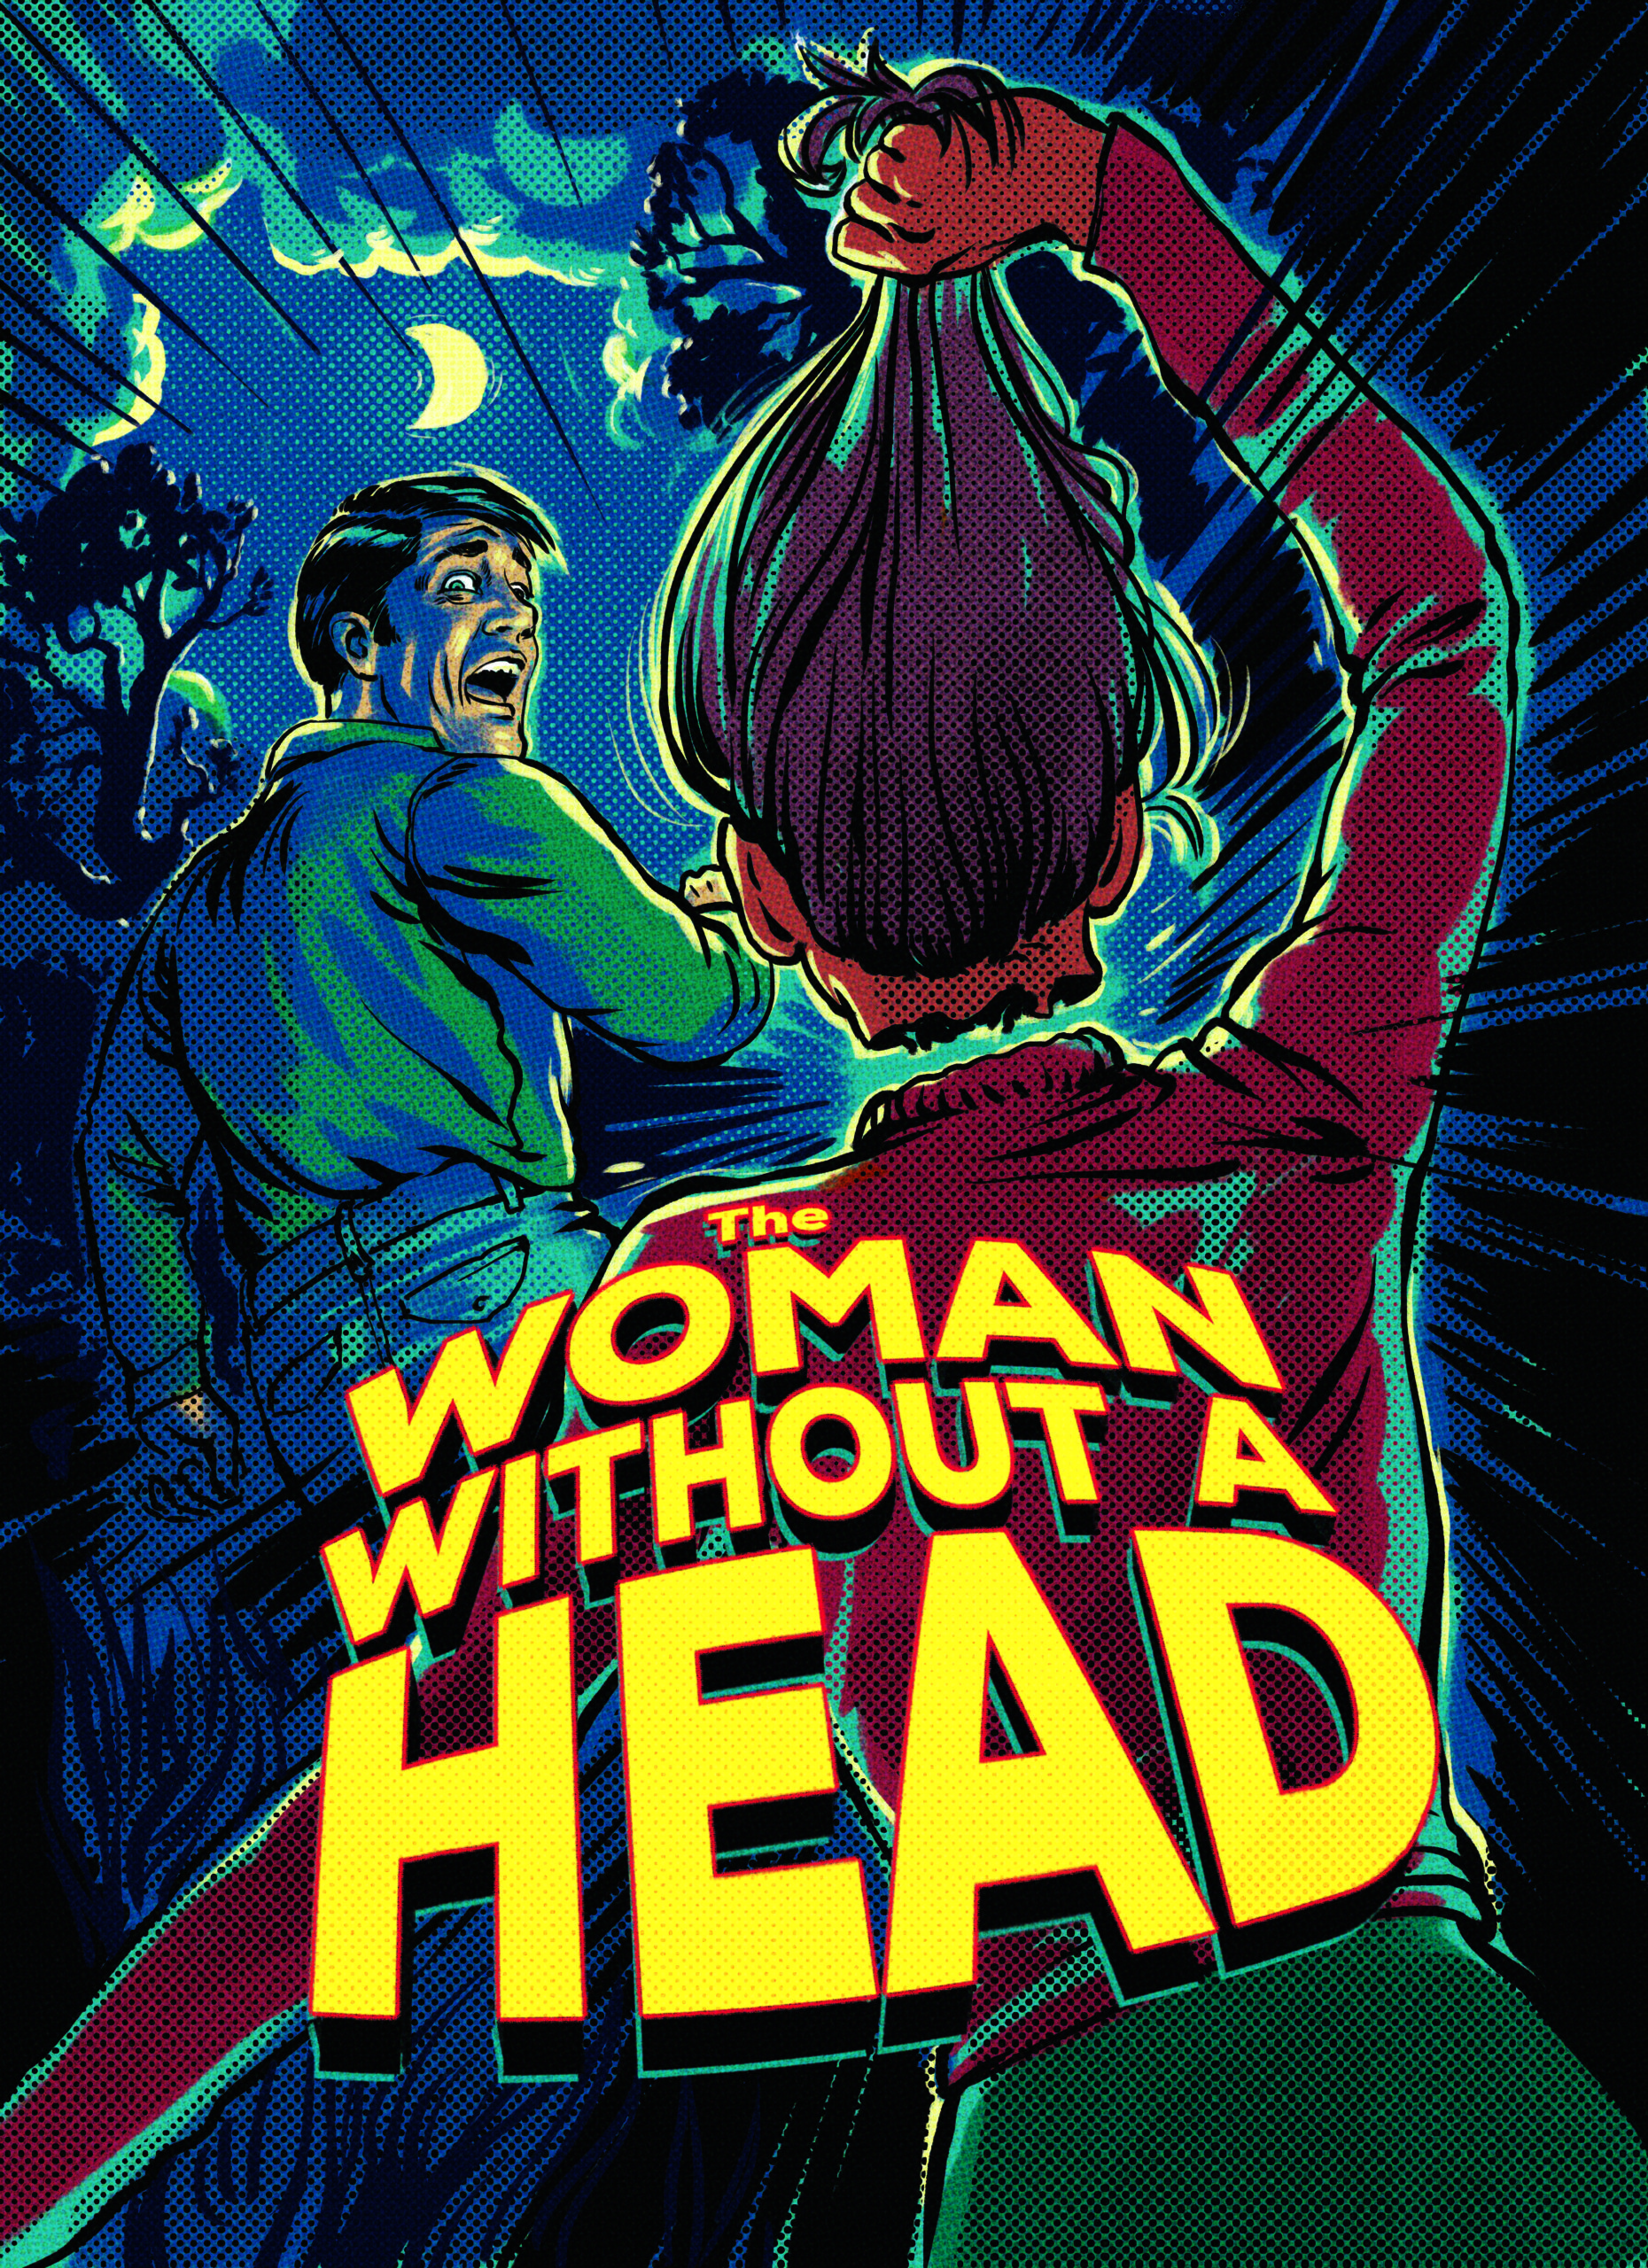 The Woman without a Head